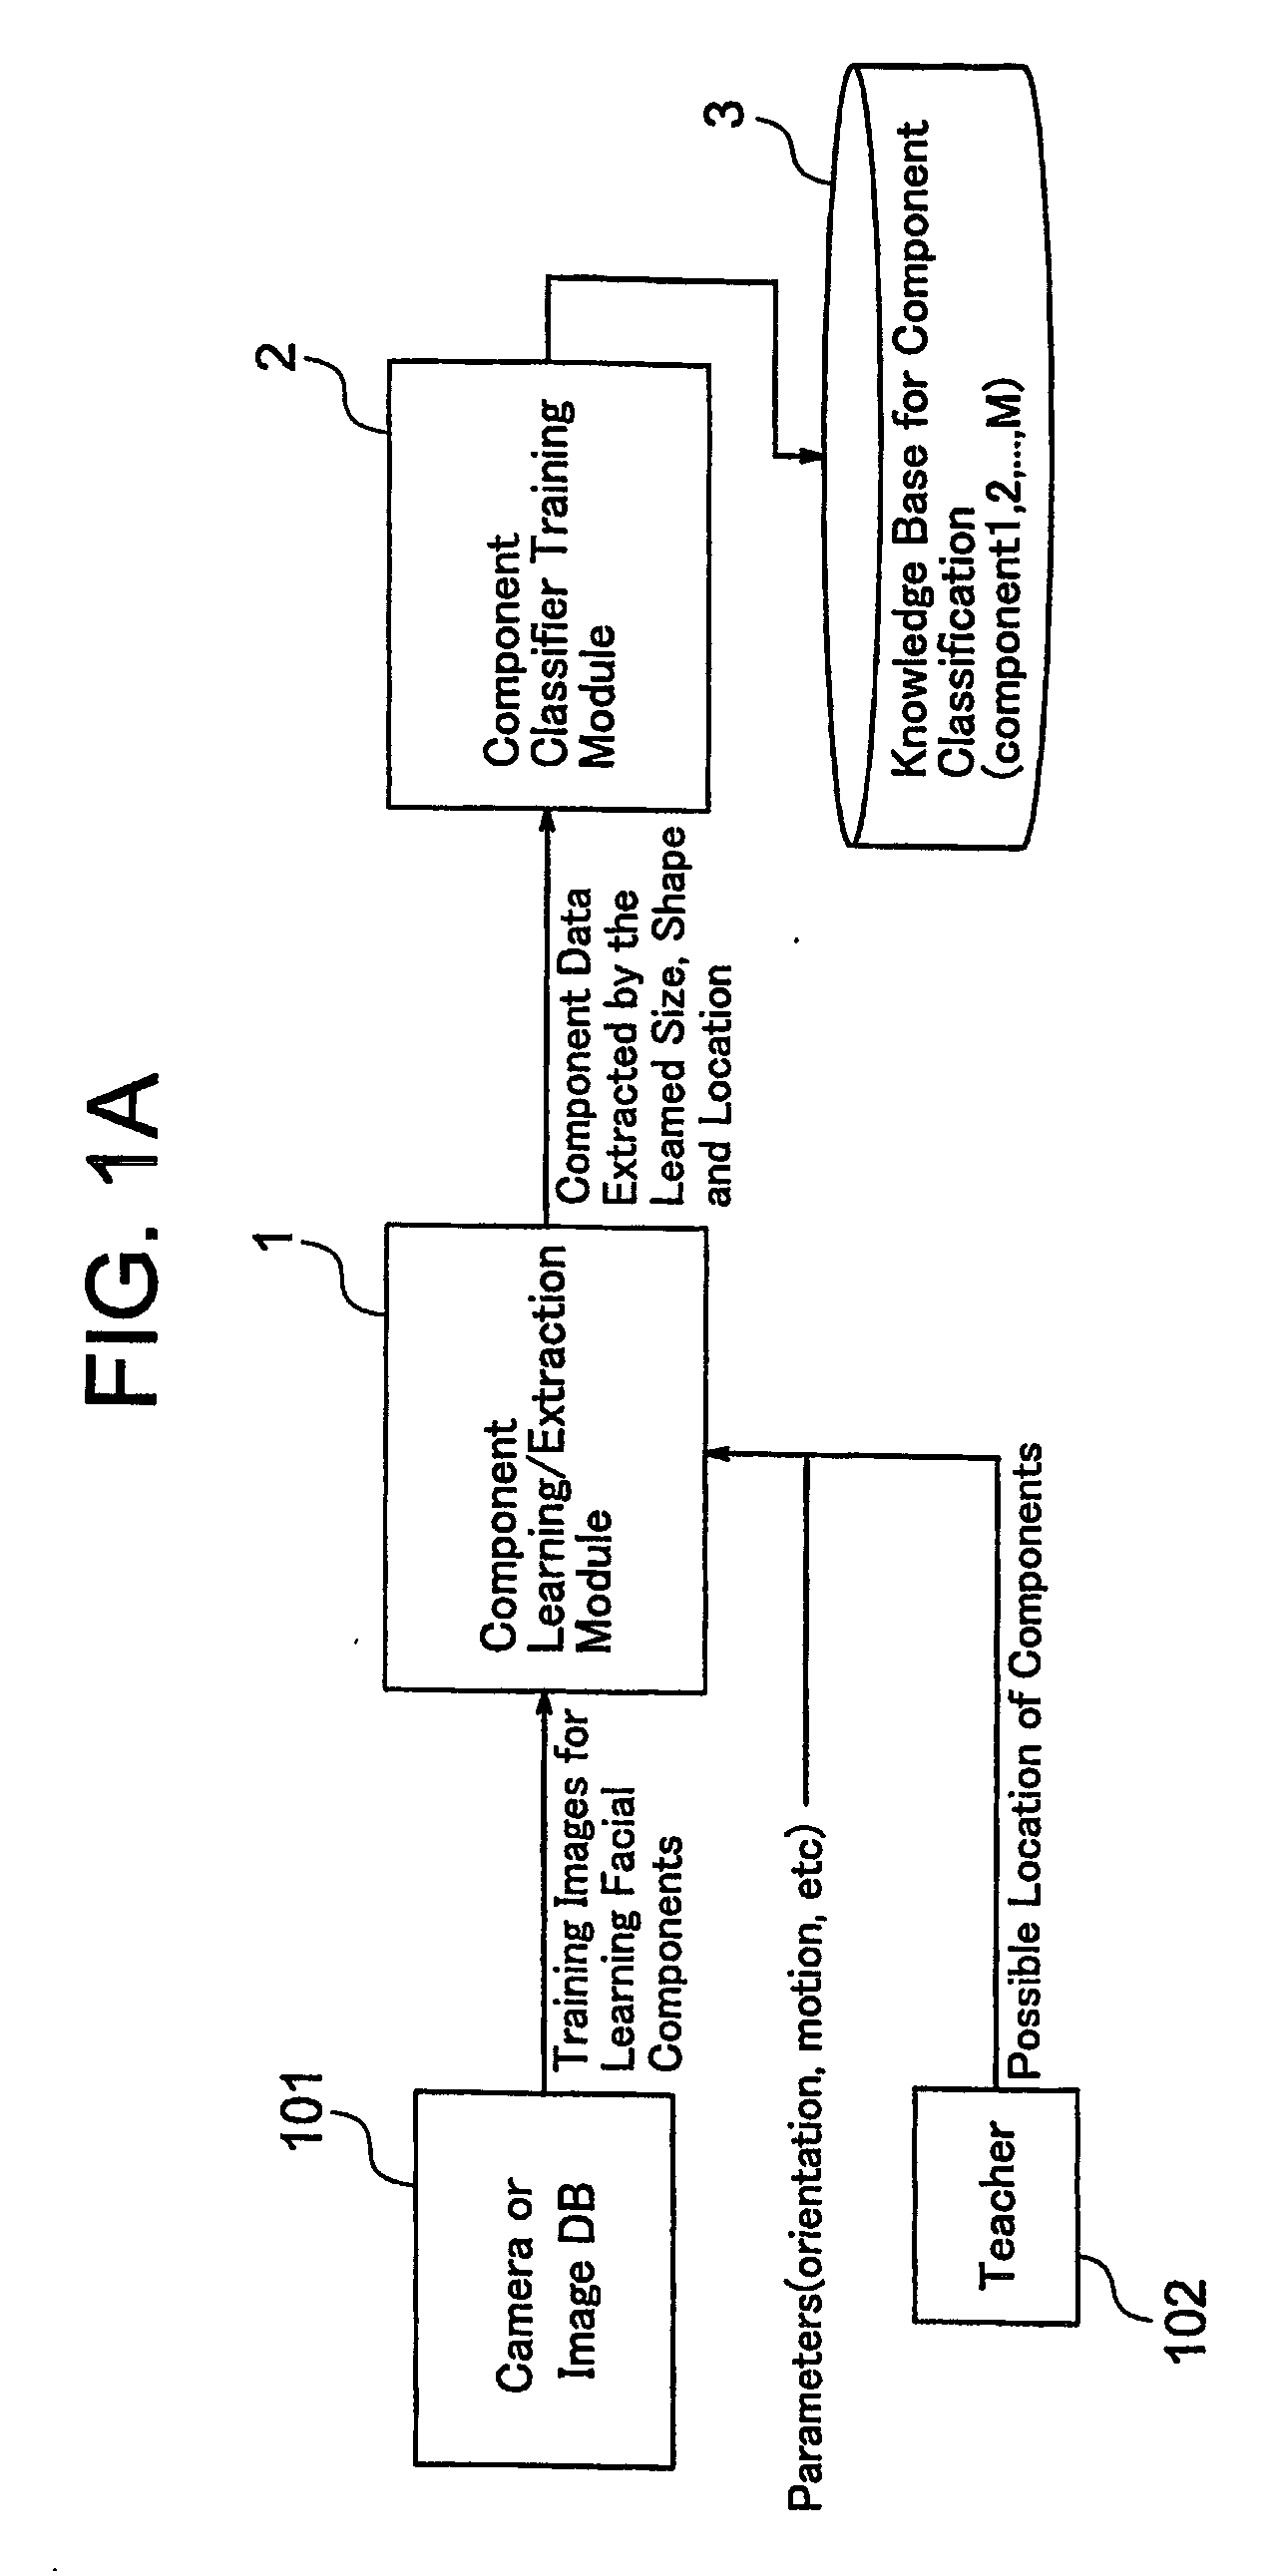 System and method for face recognition